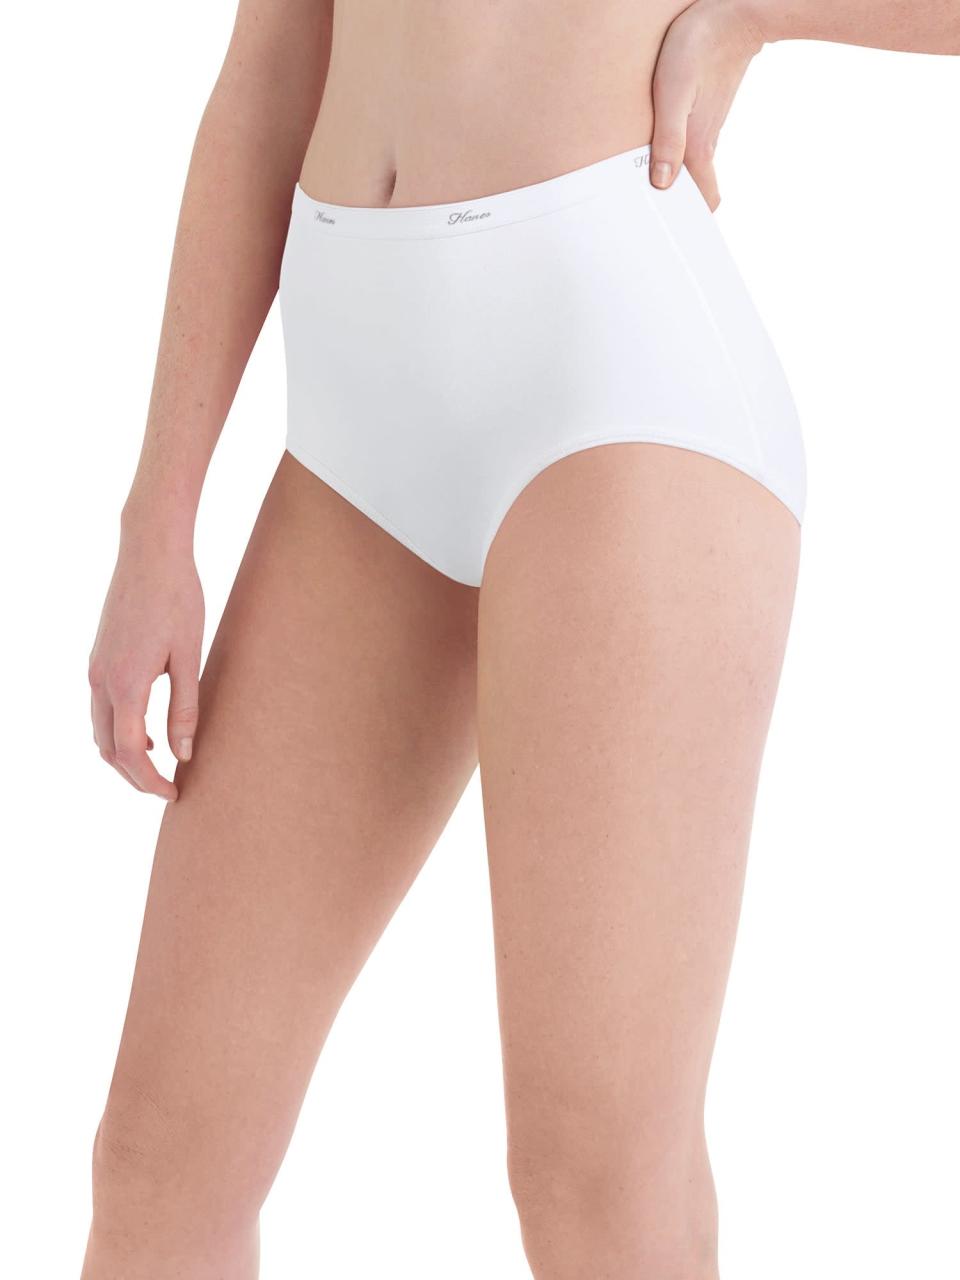 <h3>Hanes Cool Comfort Cotton Brief</h3><br><strong>The Economy Brief</strong><br>Leave it to Walmart to deliver on value. This quality cotton underwear pack's price couldn’t get much lower if it tried. If you’re on the hunt for an inexpensive, straightforward, full-coverage cotton option that you can count on, look no further. <br><br><strong>The Hype:</strong> 4.1 out of 5 stars; 3,574 reviews on <a href="https://go.skimresources.com?id=30283X879131&xs=1&url=https%3A%2F%2Fwww.walmart.com%2Fip%2FHanes-Women-s-Cool-Comfort-Cotton-Brief-Panties-6-Pack%2F10855204%3Firgwc%3D1%26sourceid%3Dimp_QJP0XgSDkxyLWAcUAW1ivzo0UkBWyqXxzSiKX00%26veh%3Daff%26wmlspartner%3Dimp_10078%26clickid%3DQJP0XgSDkxyLWAcUAW1ivzo0UkBWyqXxzSiKX00%26sharedid%3Drefinery29.com%26affiliates_ad_id%3D612734%26campaign_id%3D9383" rel="nofollow noopener" target="_blank" data-ylk="slk:Walmart.com" class="link ">Walmart.com</a><br><br><strong>What They Are Saying:</strong> “Great fit and very comfy! Bought one package for me and one for my daughter. I've been buying these for many years now and love them! Sizing is right on the money and they're really comfortable!”<br><br><br><br><strong>Hanes</strong> 6-Pack Cool Comfort Cotton Brief Panties, $, available at <a href="https://go.skimresources.com/?id=30283X879131&url=https%3A%2F%2Fwww.walmart.com%2Fip%2FHanes-Women-s-Cool-Comfort-Cotton-Brief-Panties-6-Pack%2F10855204" rel="nofollow noopener" target="_blank" data-ylk="slk:Walmart" class="link ">Walmart</a>